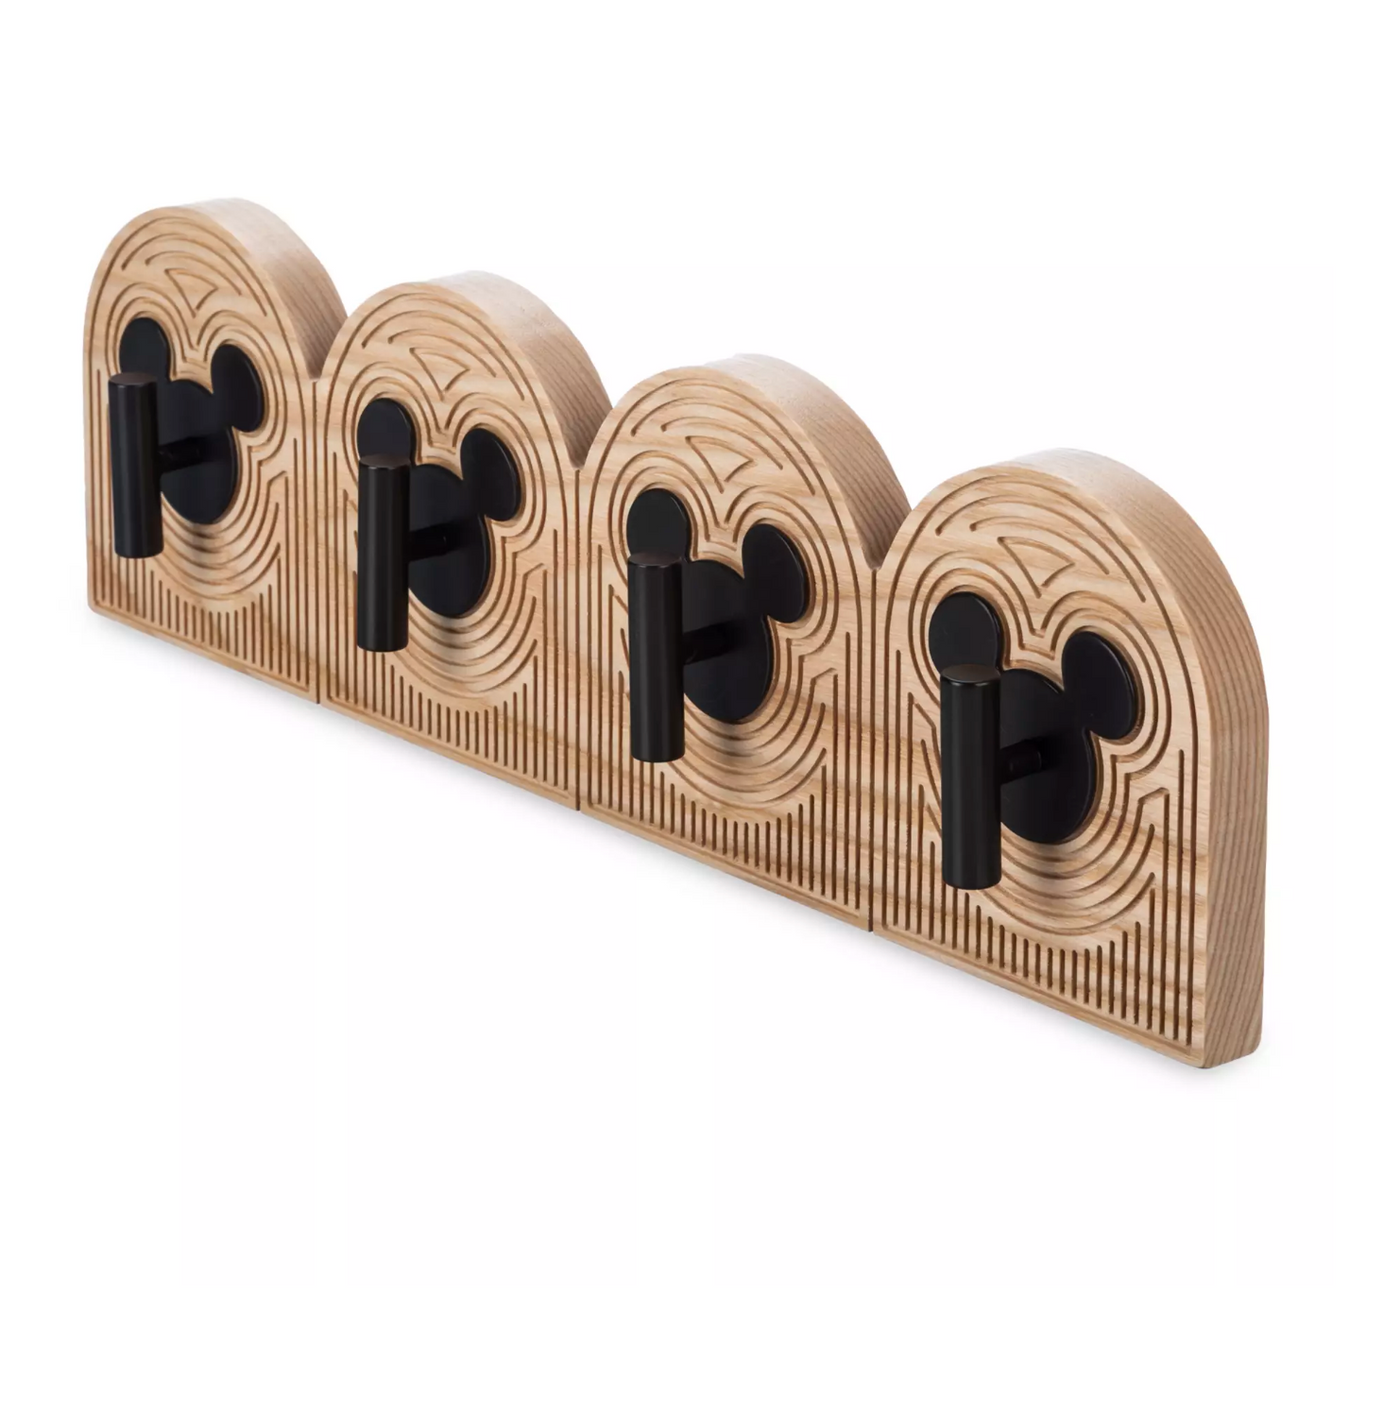 Disney Parks Home Collection Mickey Icon Wood Hook Rack New